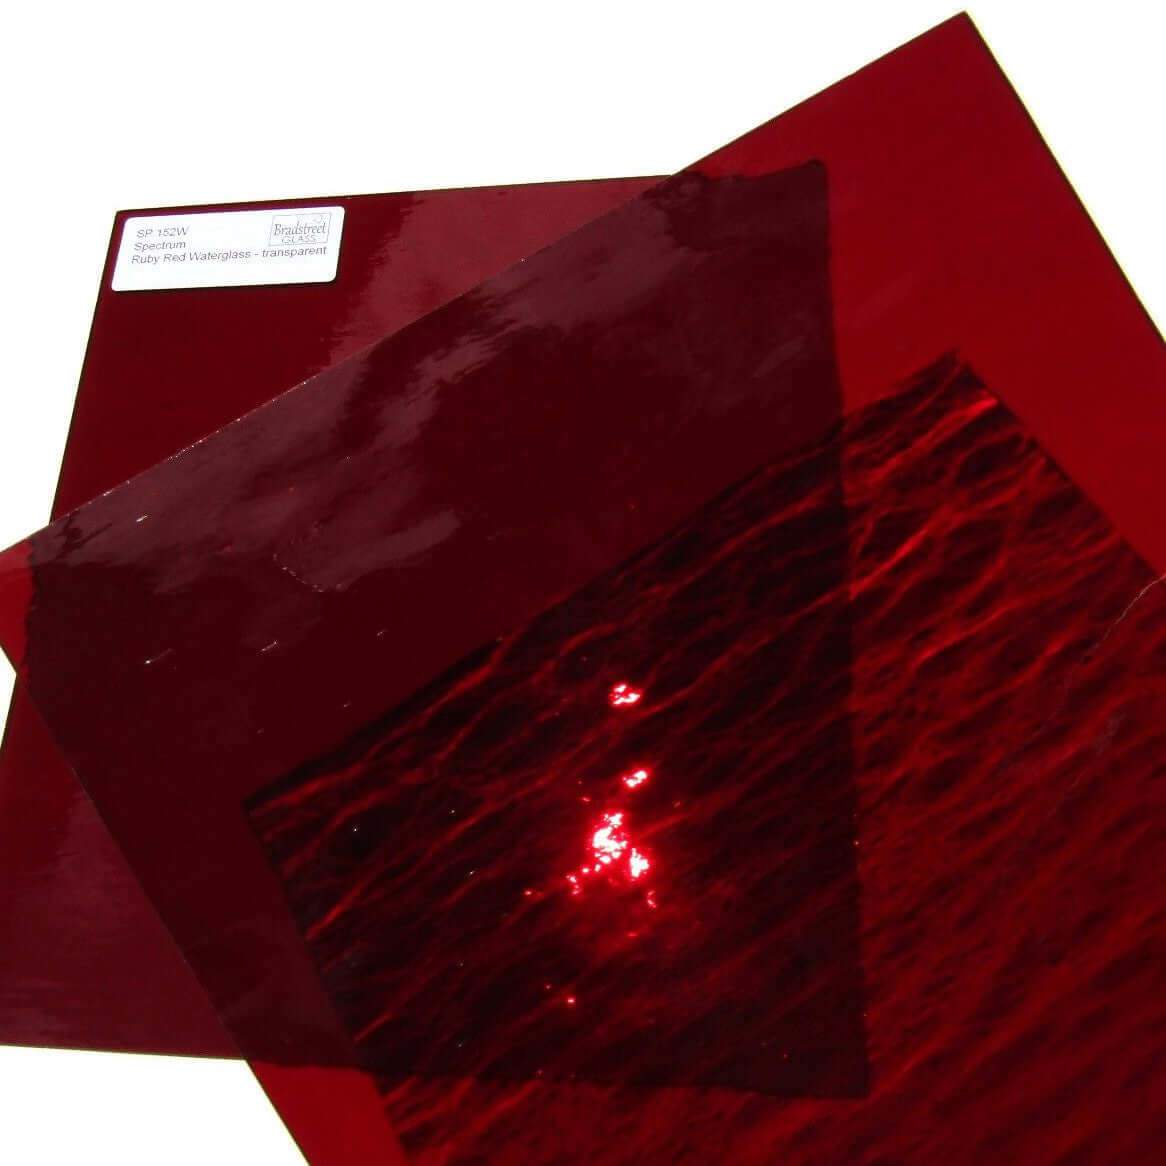 Spectrum Ruby Red Waterglass Translucent Cathedral Stained Glass Sheet SP 152W